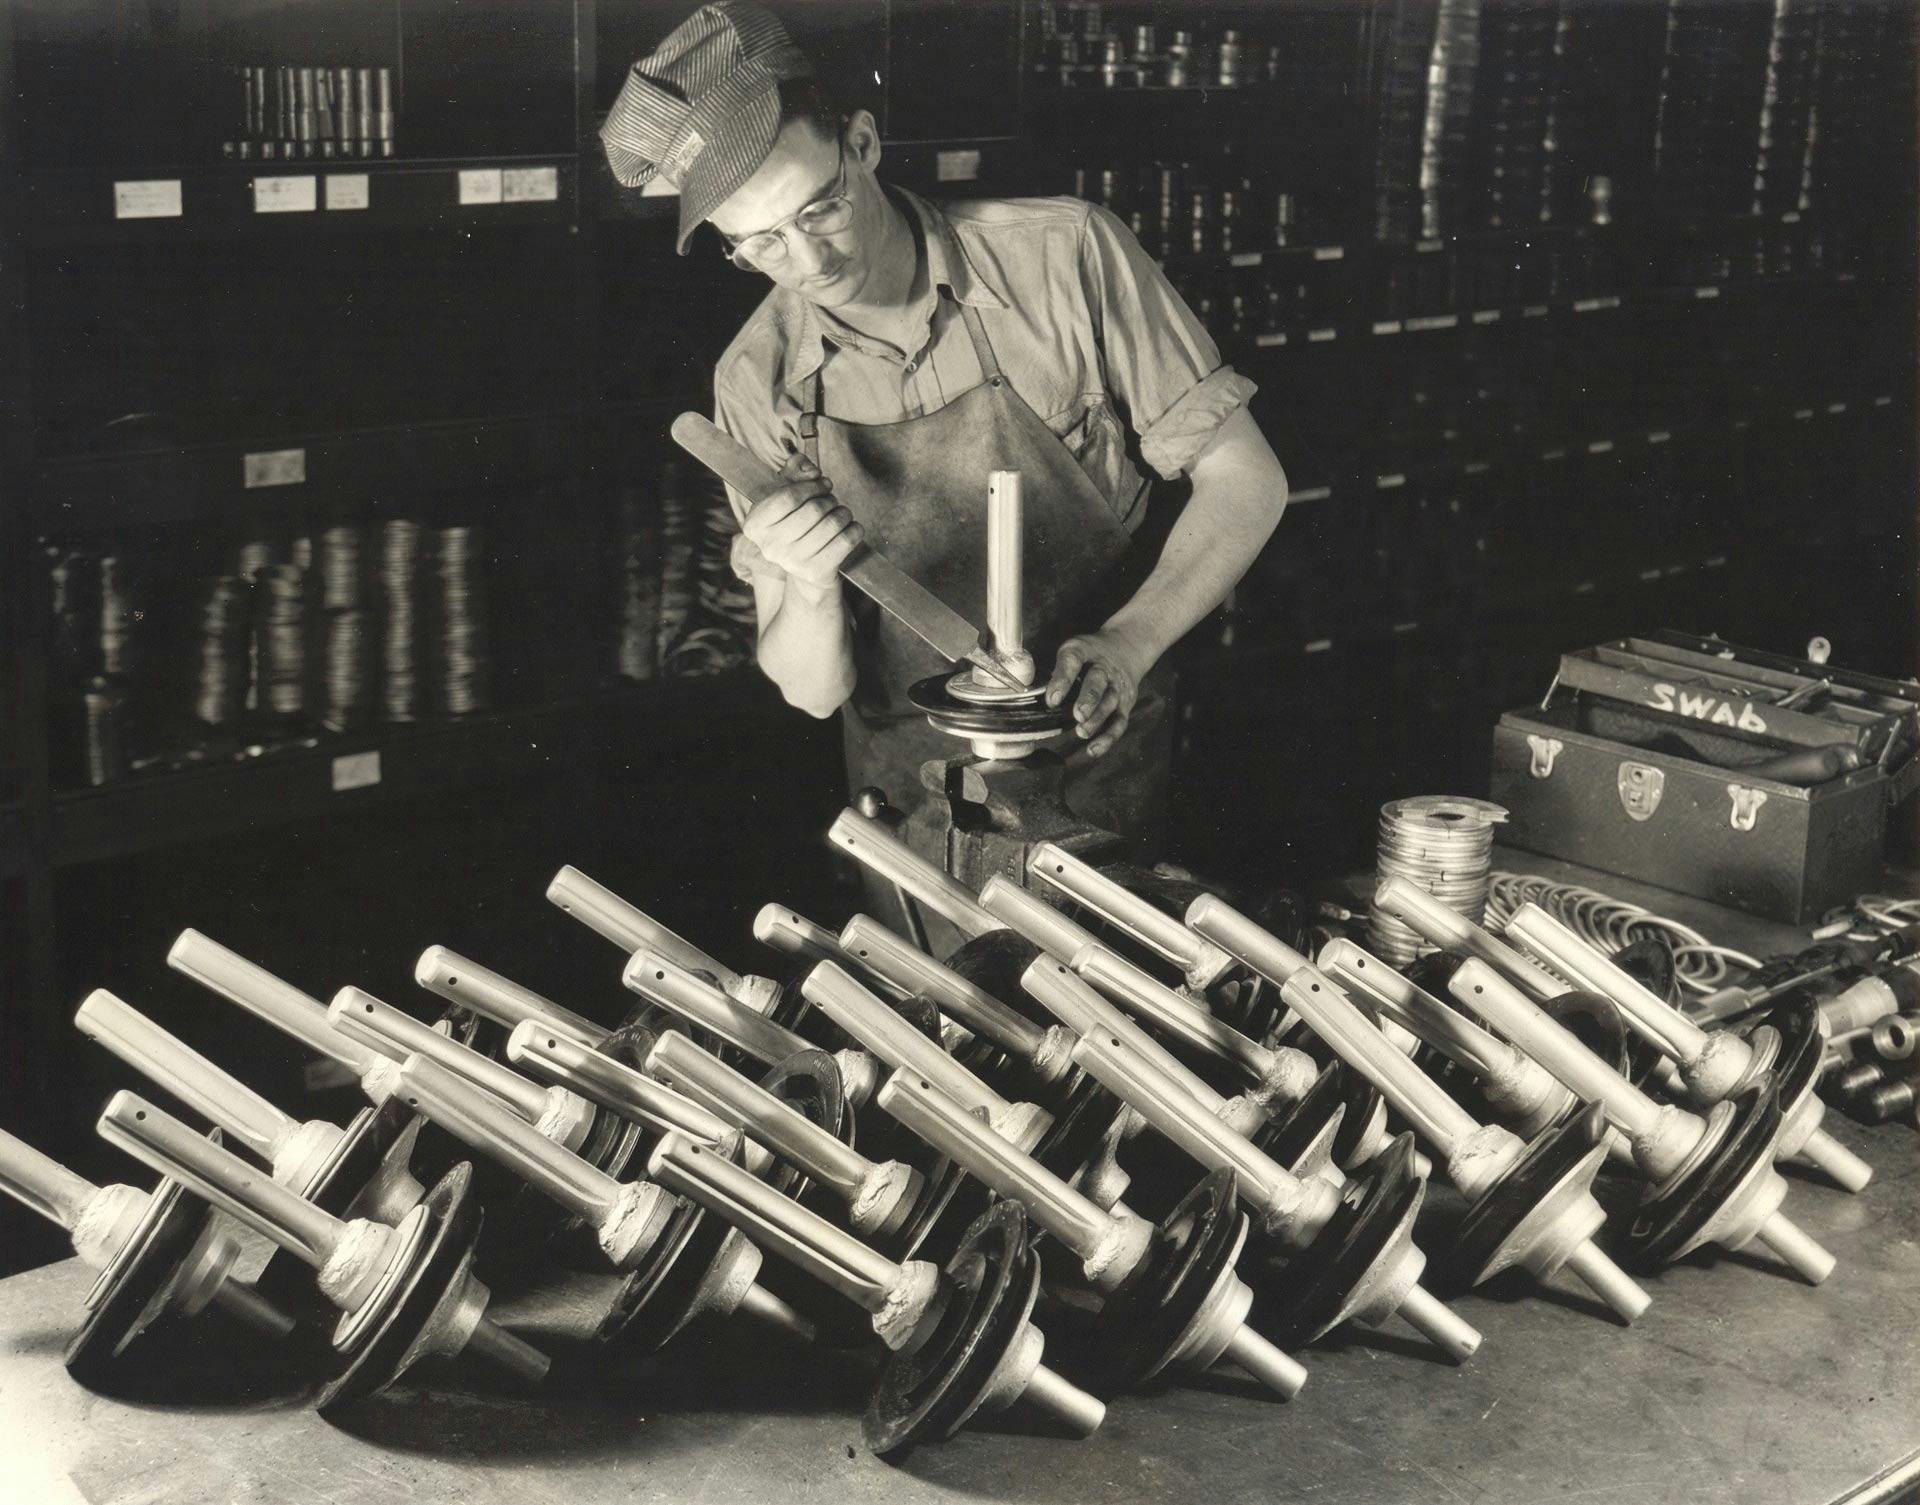 Vintage image of Mission mud master valves from the 1950s